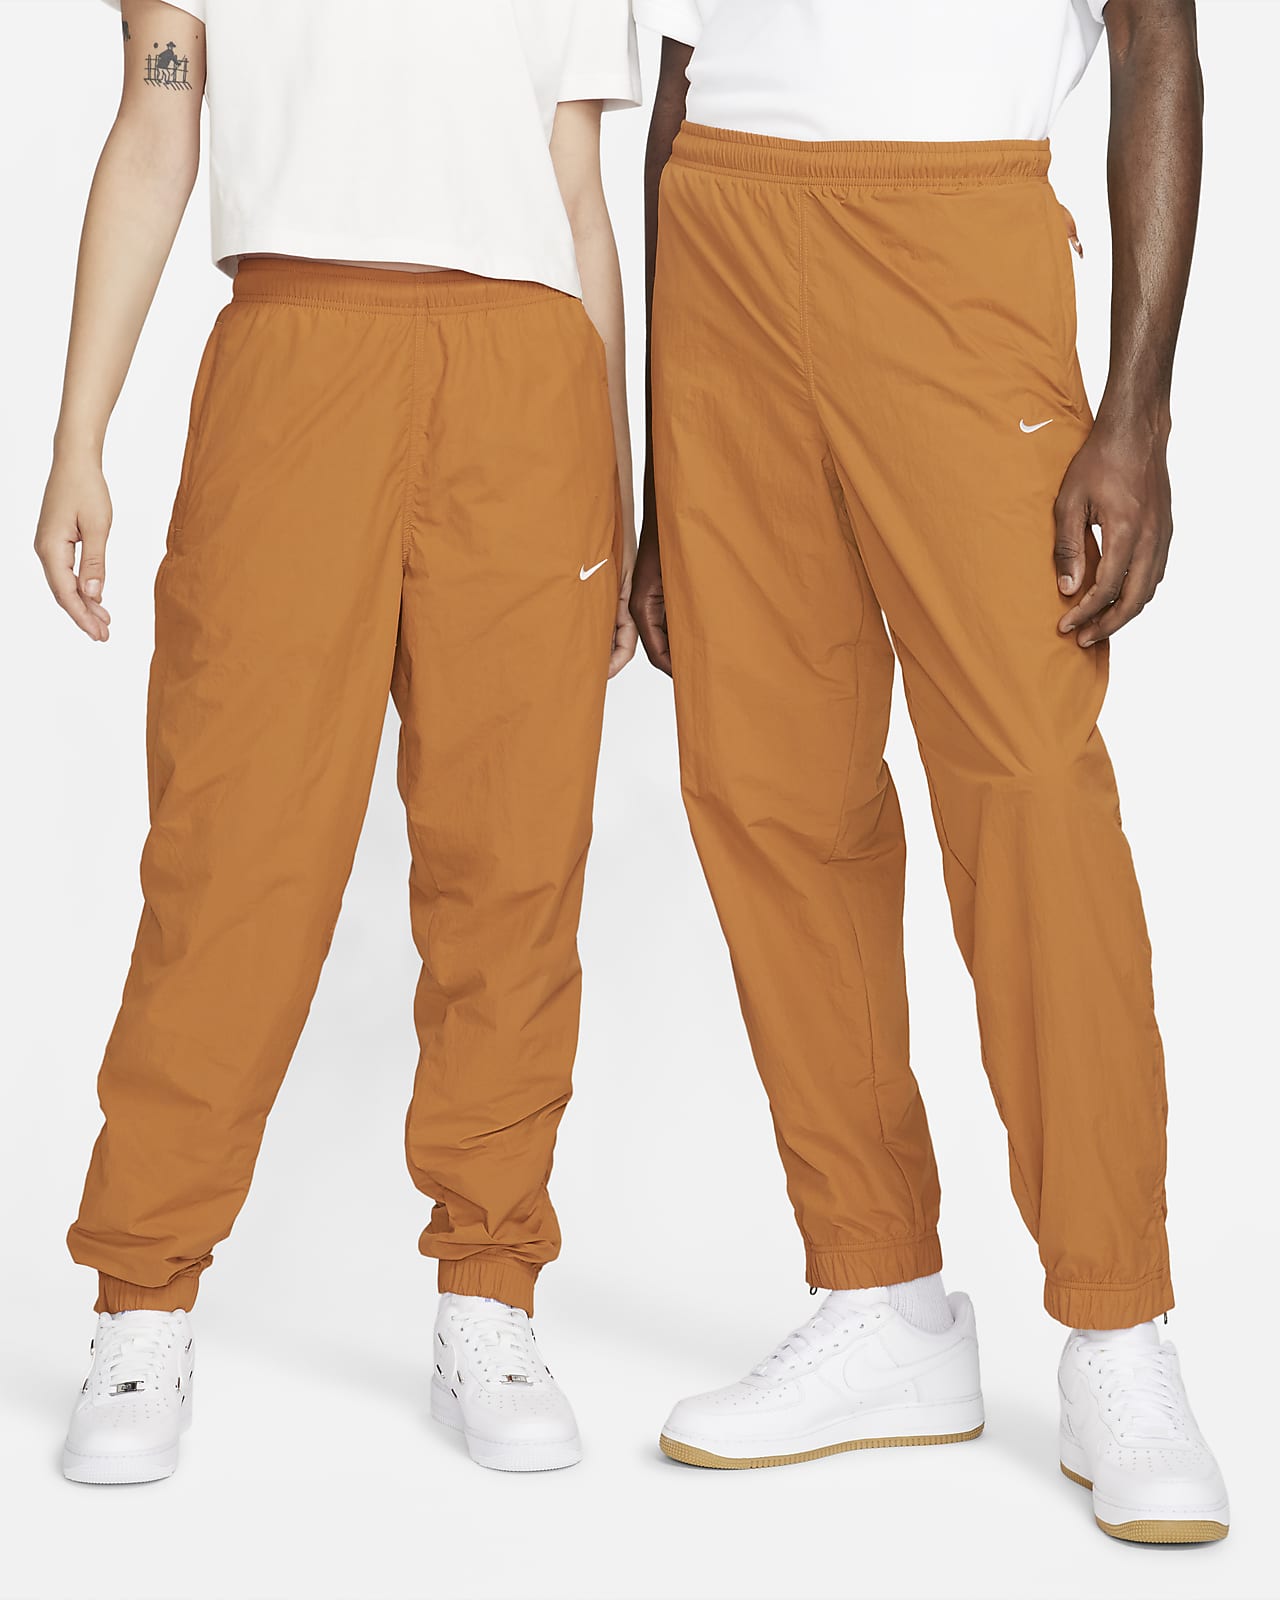 Nike Mens Joggers Tracksuit Air Woven Cuffed Bottoms Sweatpants